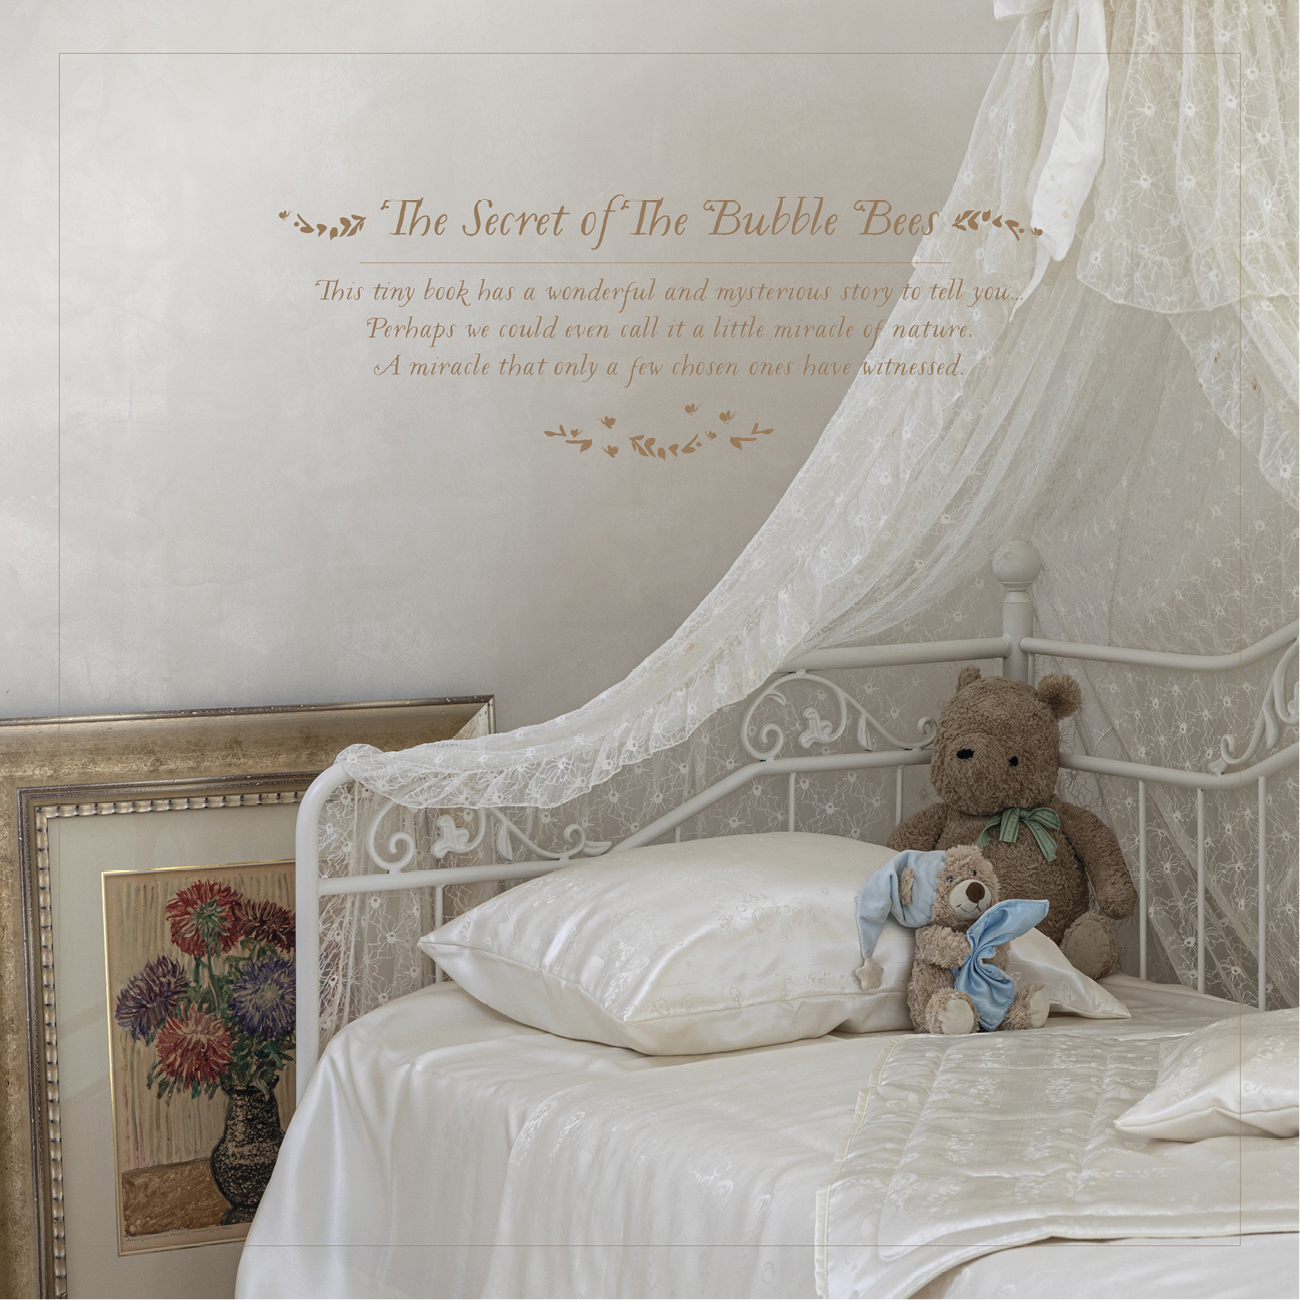 High End Children's Silk Bedding Set The Bubble Bee Silk Jacquard Nature with the fairy tale book "The Secret of The Bubble Bees" is exceptional gift for your precious child. Duvet cover, flat bed sheet, pillow case. All stitches finished with a french seams. Bespoke sizes